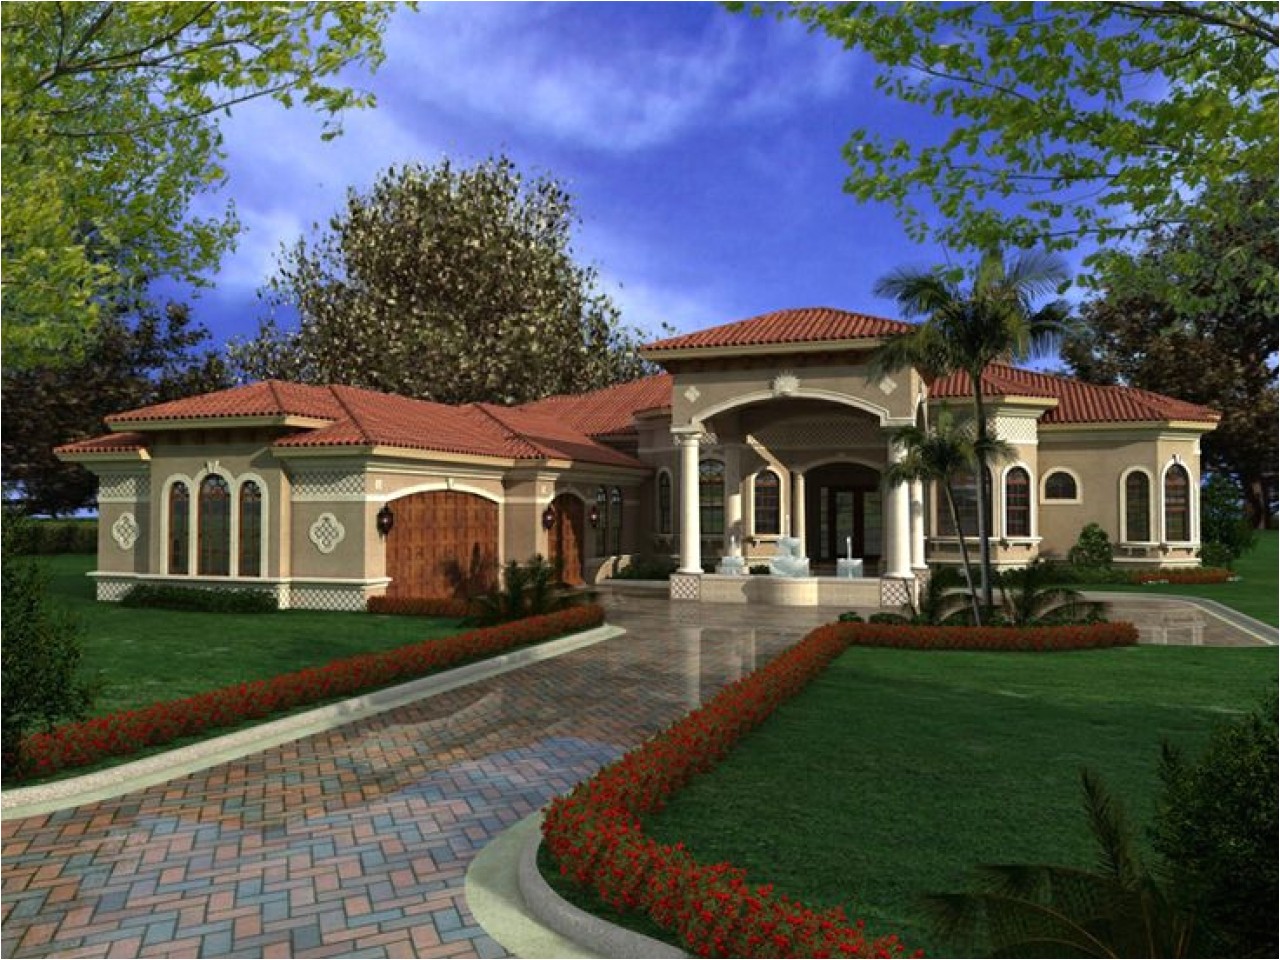 893b7f95fa70ba75 one story mediterranean house plans mediterranean houses with courtyards